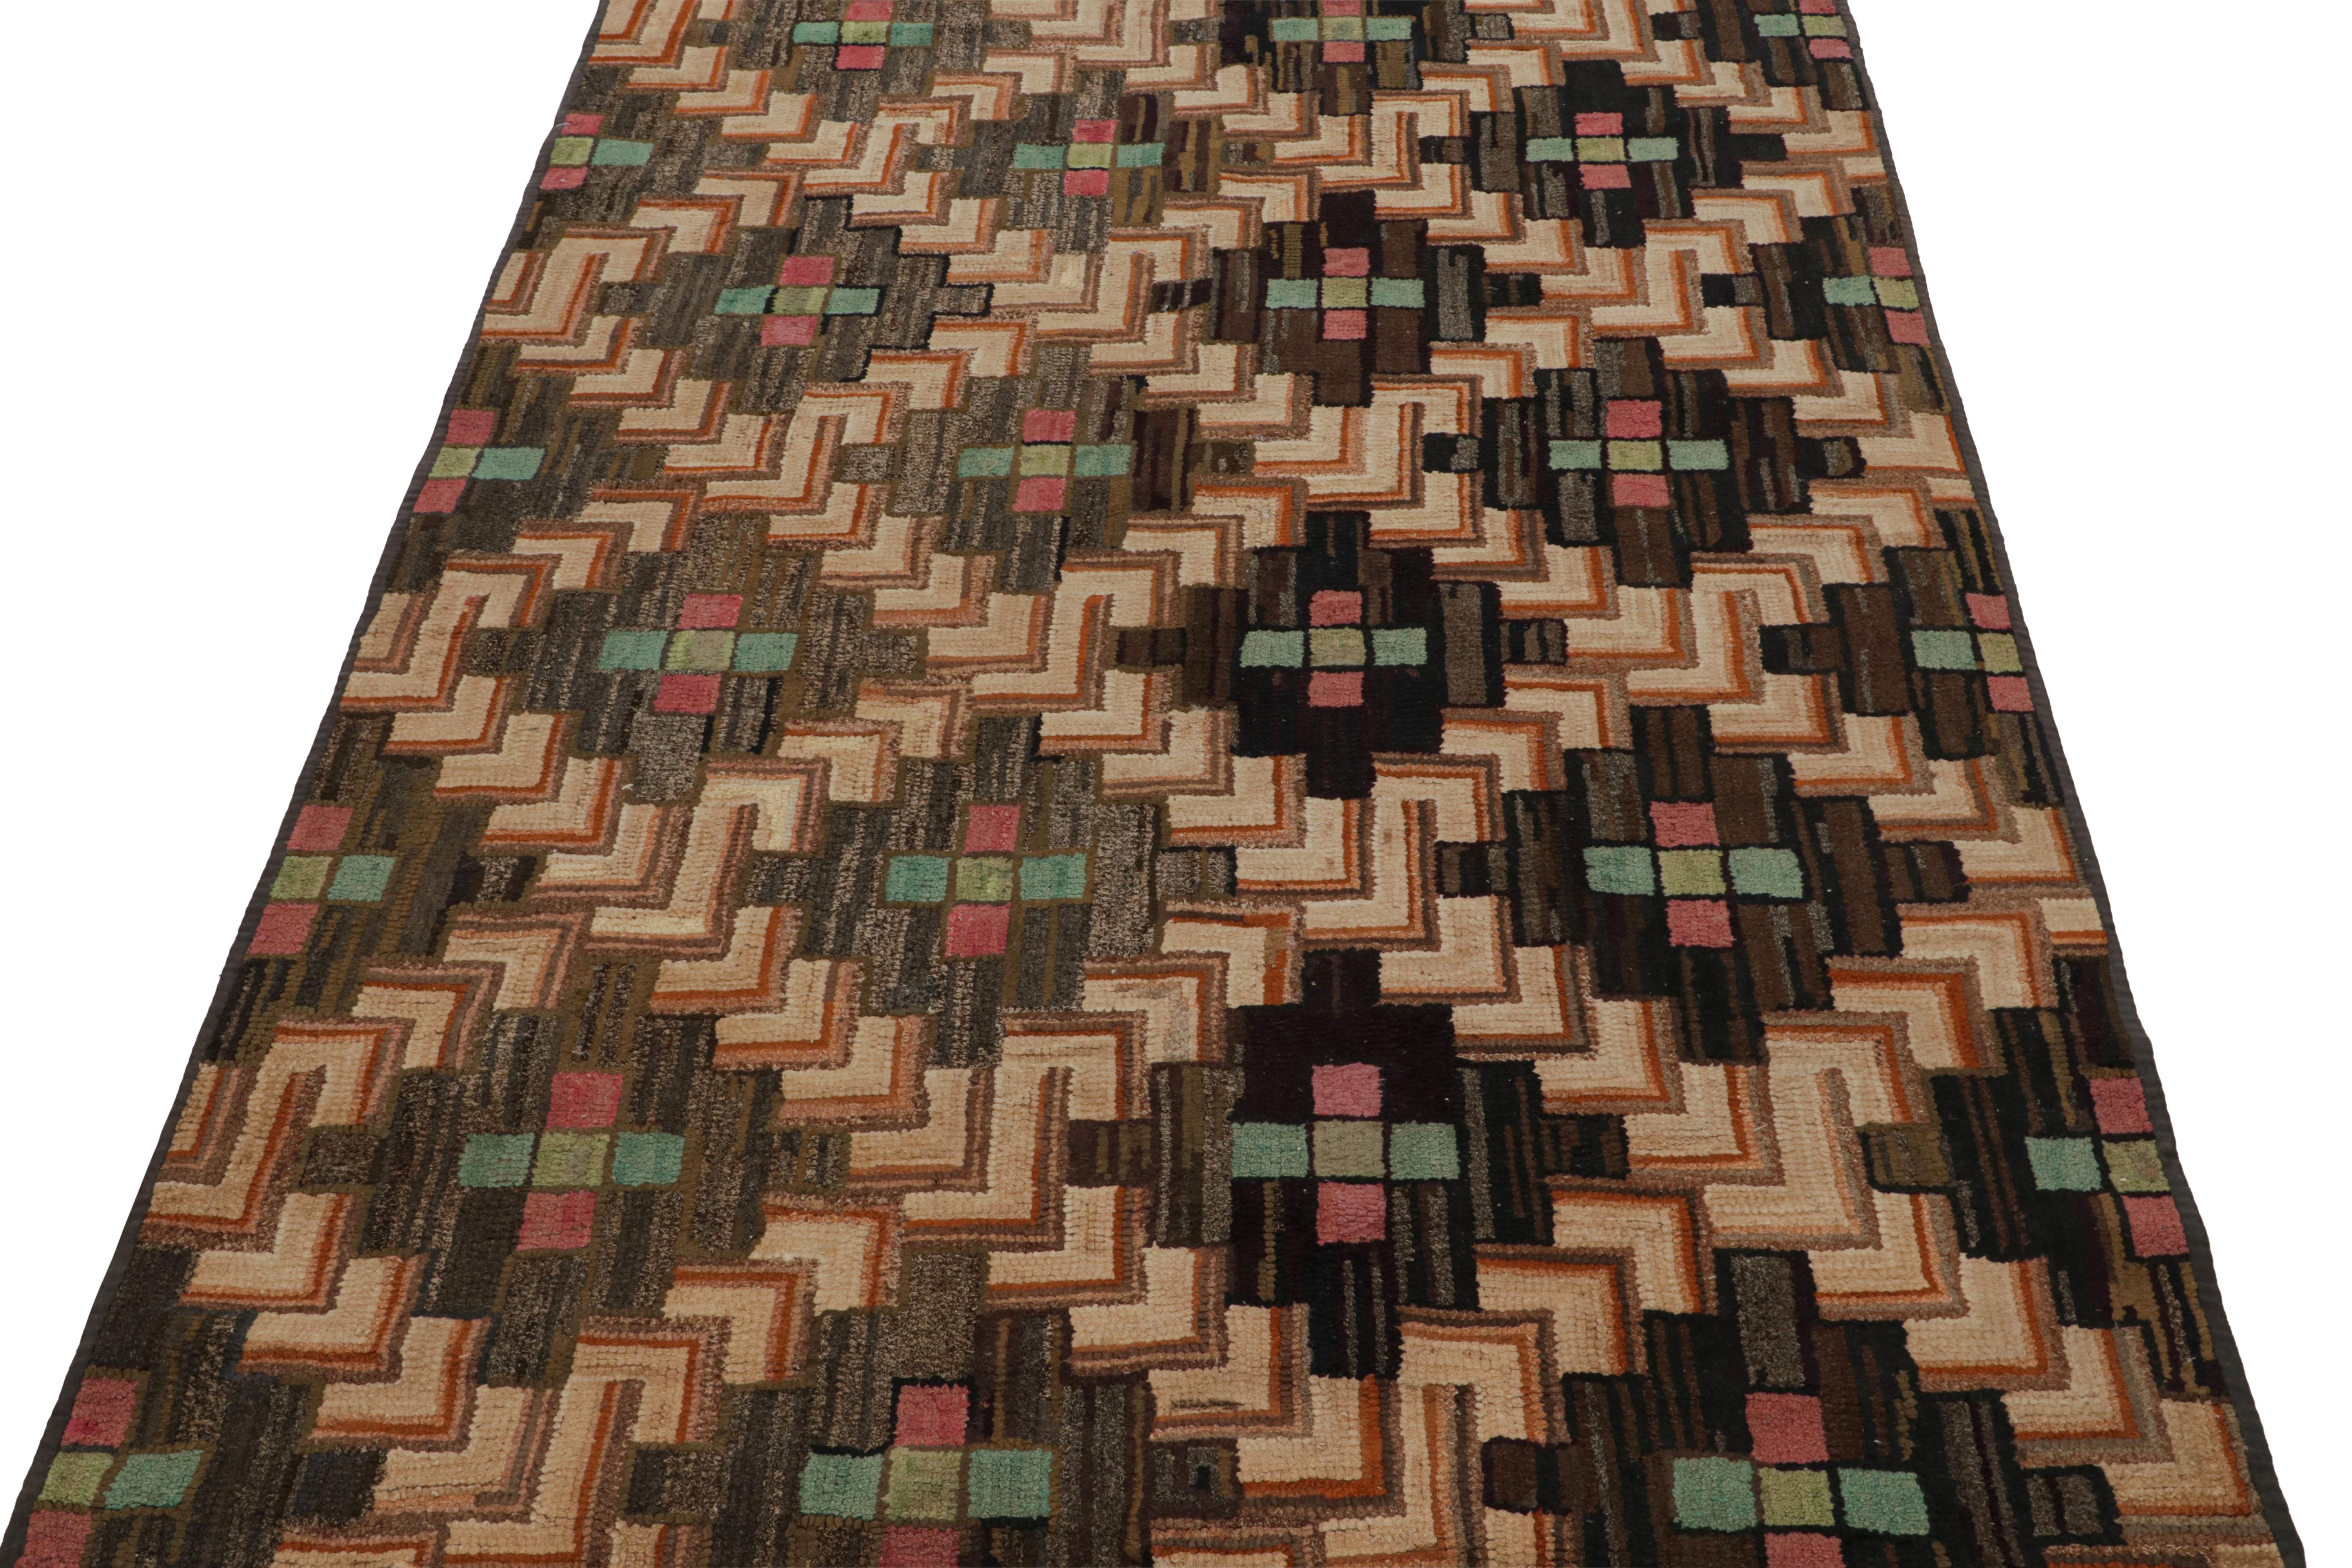 American Antique Hooked Rug with Polychromatic Geometric Patterns, from Rug & Kilim For Sale